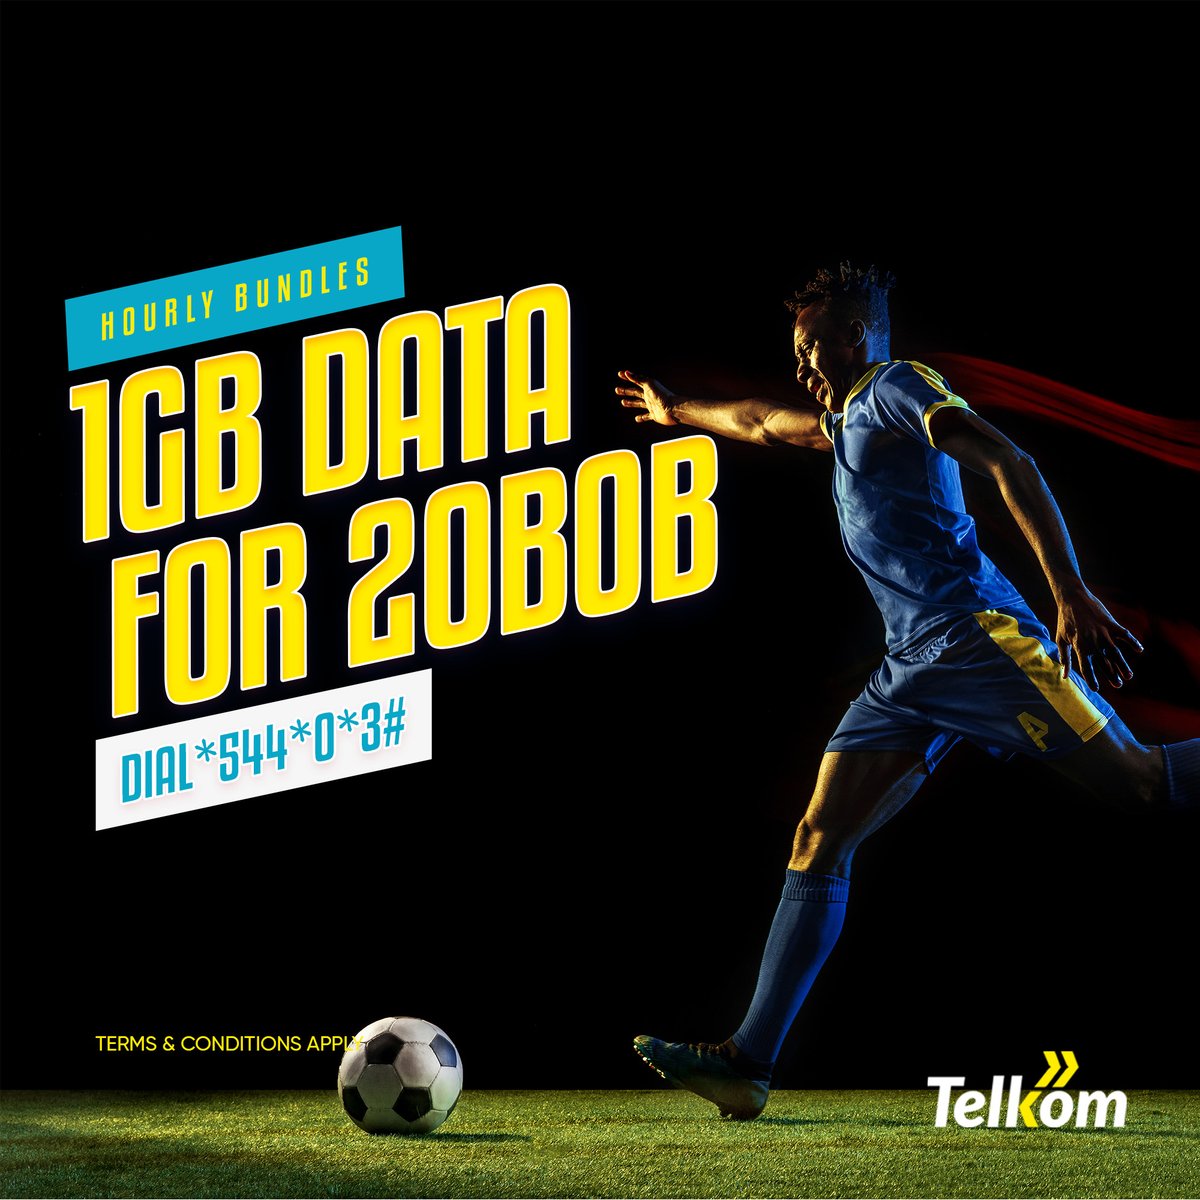 Calling all football fanatics! ⚽ Don't miss the New Castle vs Spurs showdown at St James Park, at 2:30 pm! Stay connected with 1GB for just 20 bob and catch every thrill and goal! Dial *544*0*3# and catch every thrilling moment LIVE! 🙌📲 #StayConnected